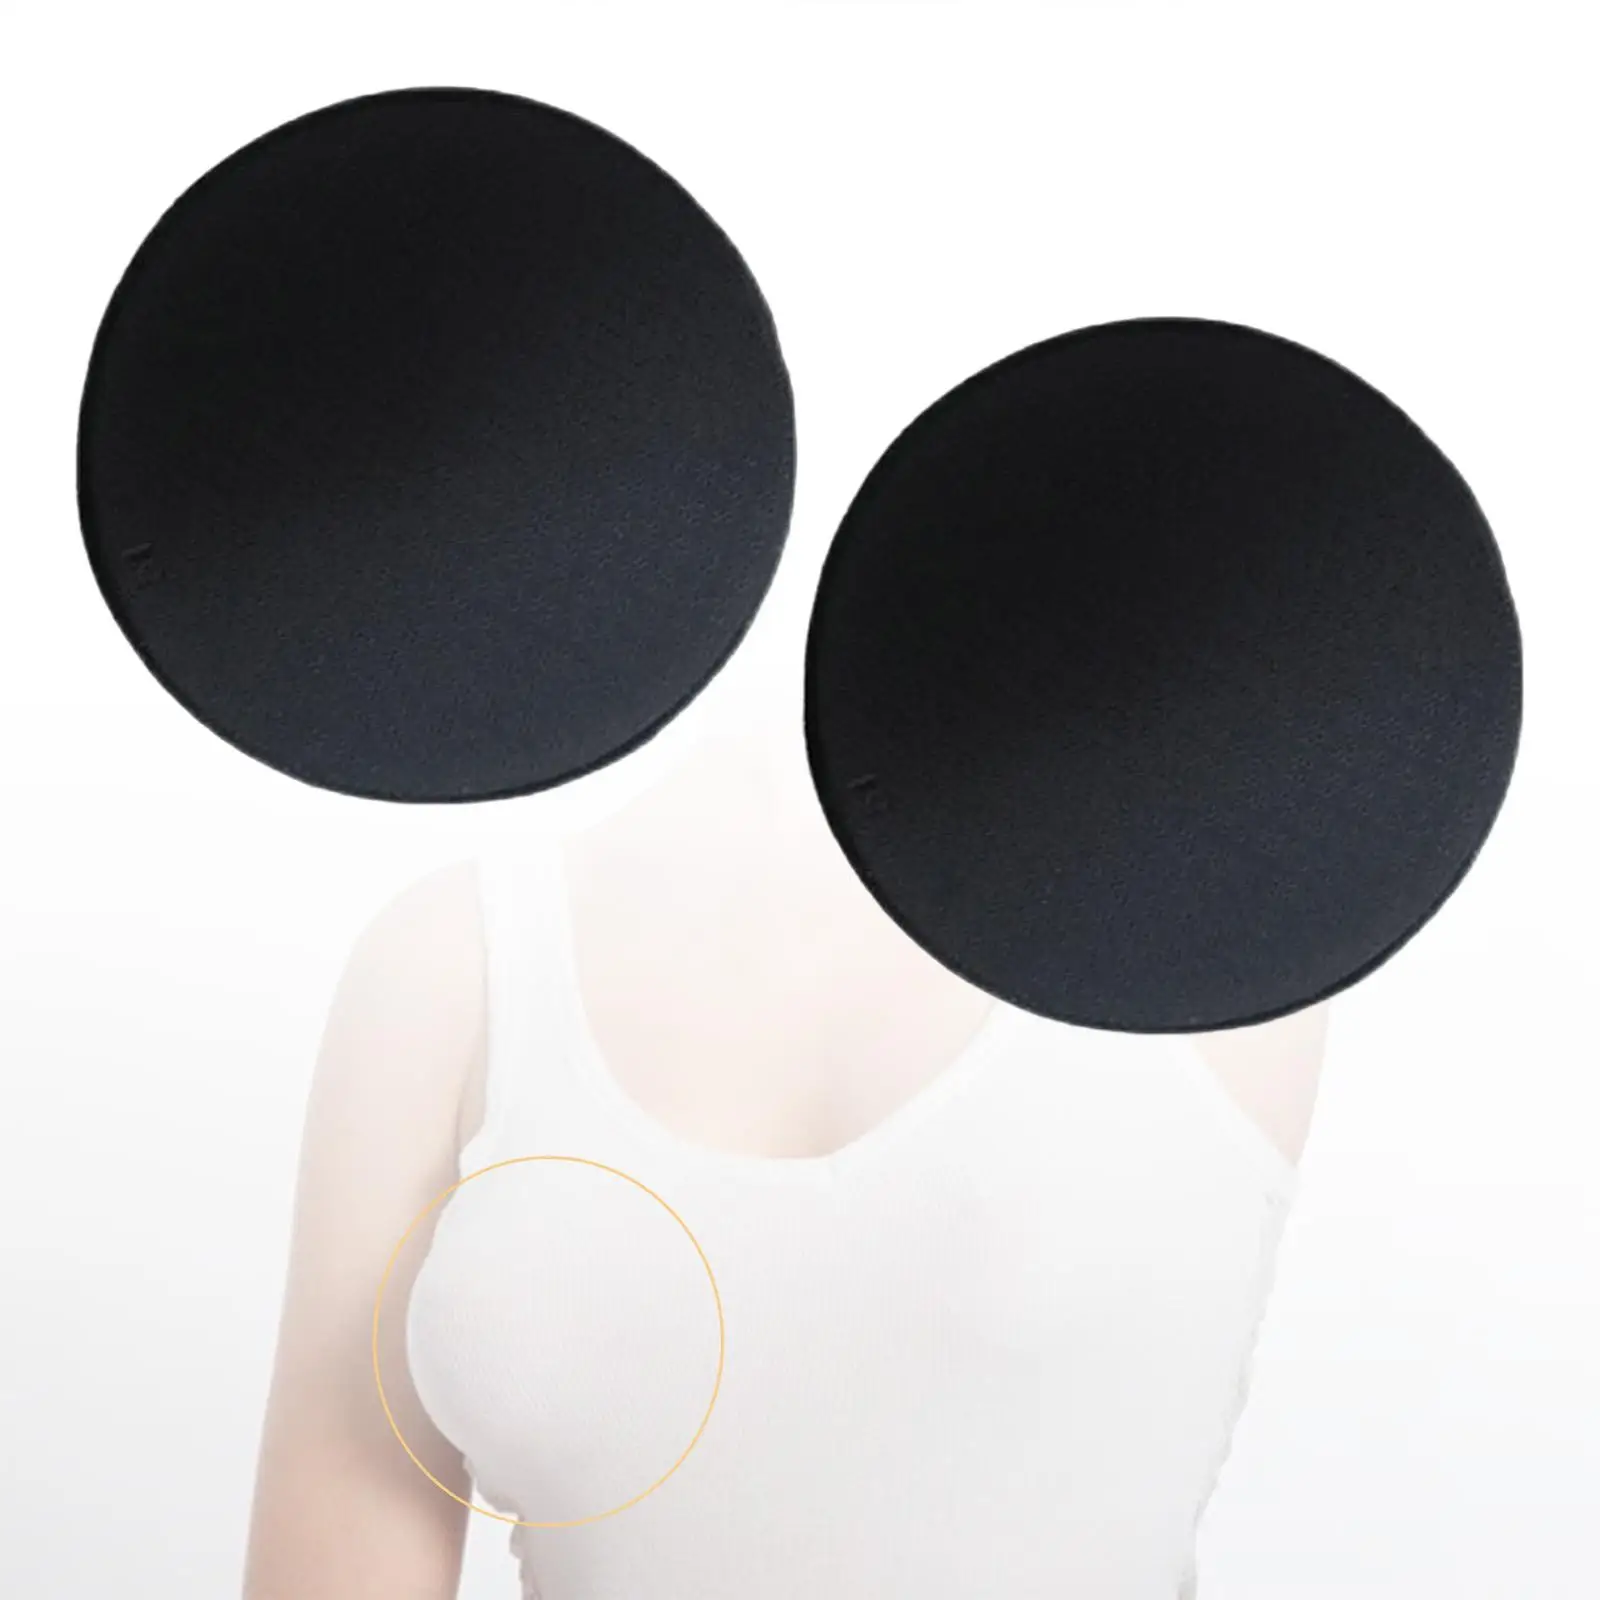 2Pcs Women Bra Pads Inserts, Sports Cups Bra Insert Padding Refreshing Lightweight Comfy for Evening Gowns Intimates Accessories